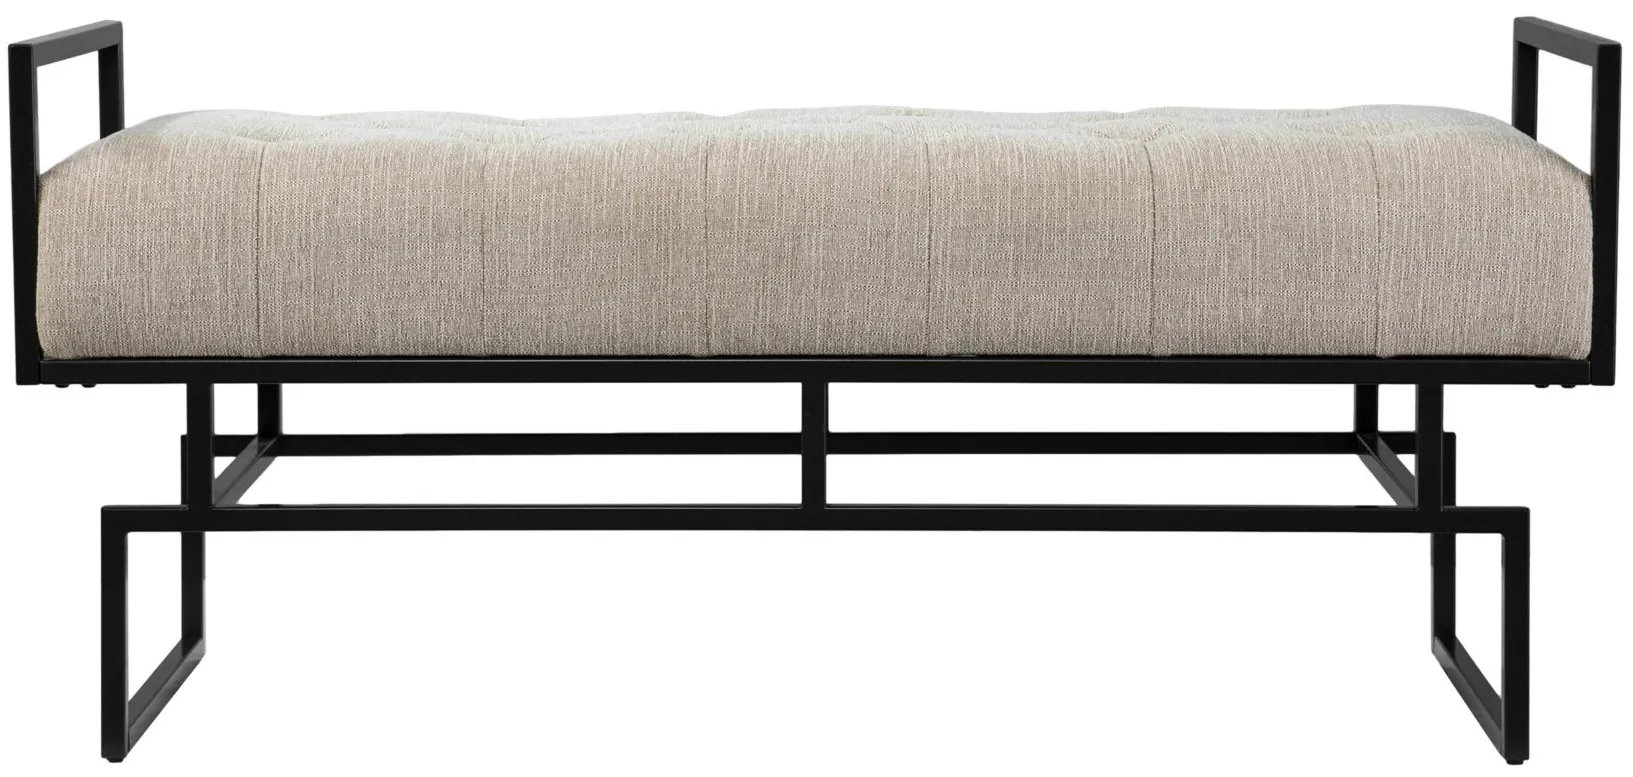 Marseille Upholstered Bench in Beige by SEI Furniture